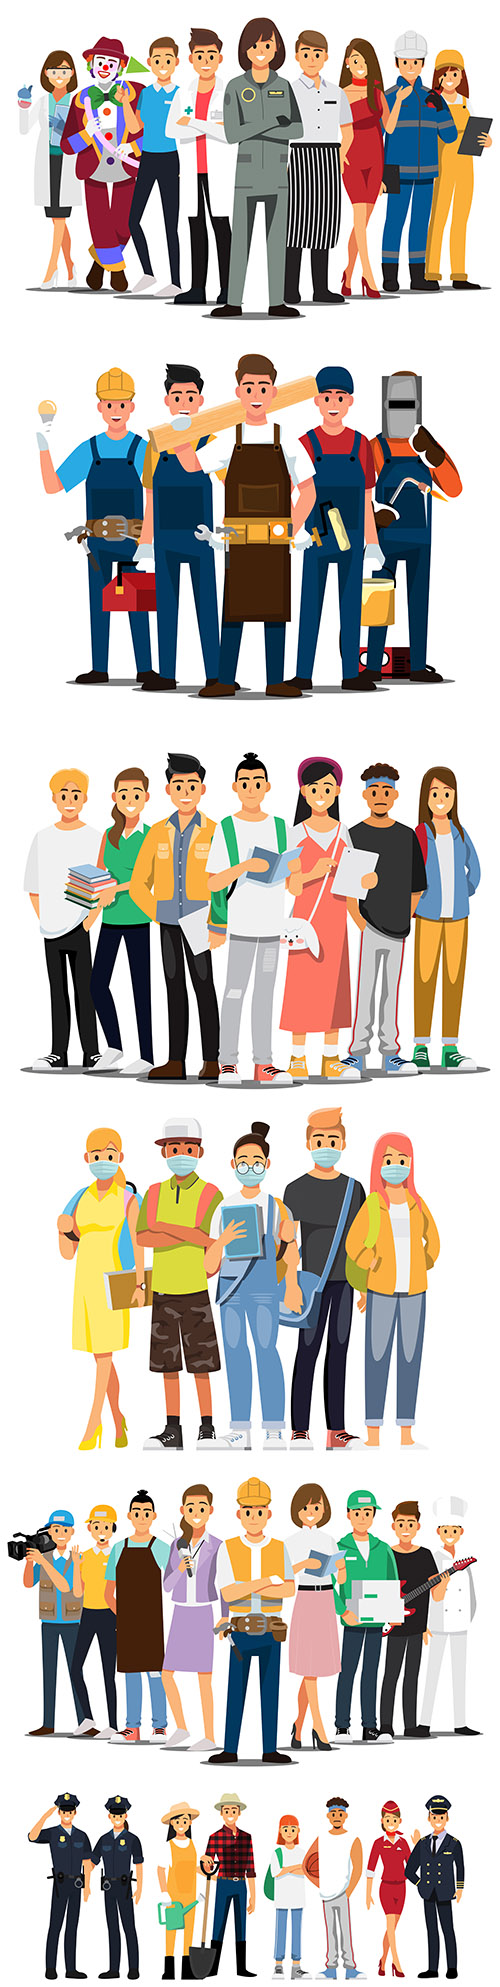 People of different professions and lifestyle flat design 9
